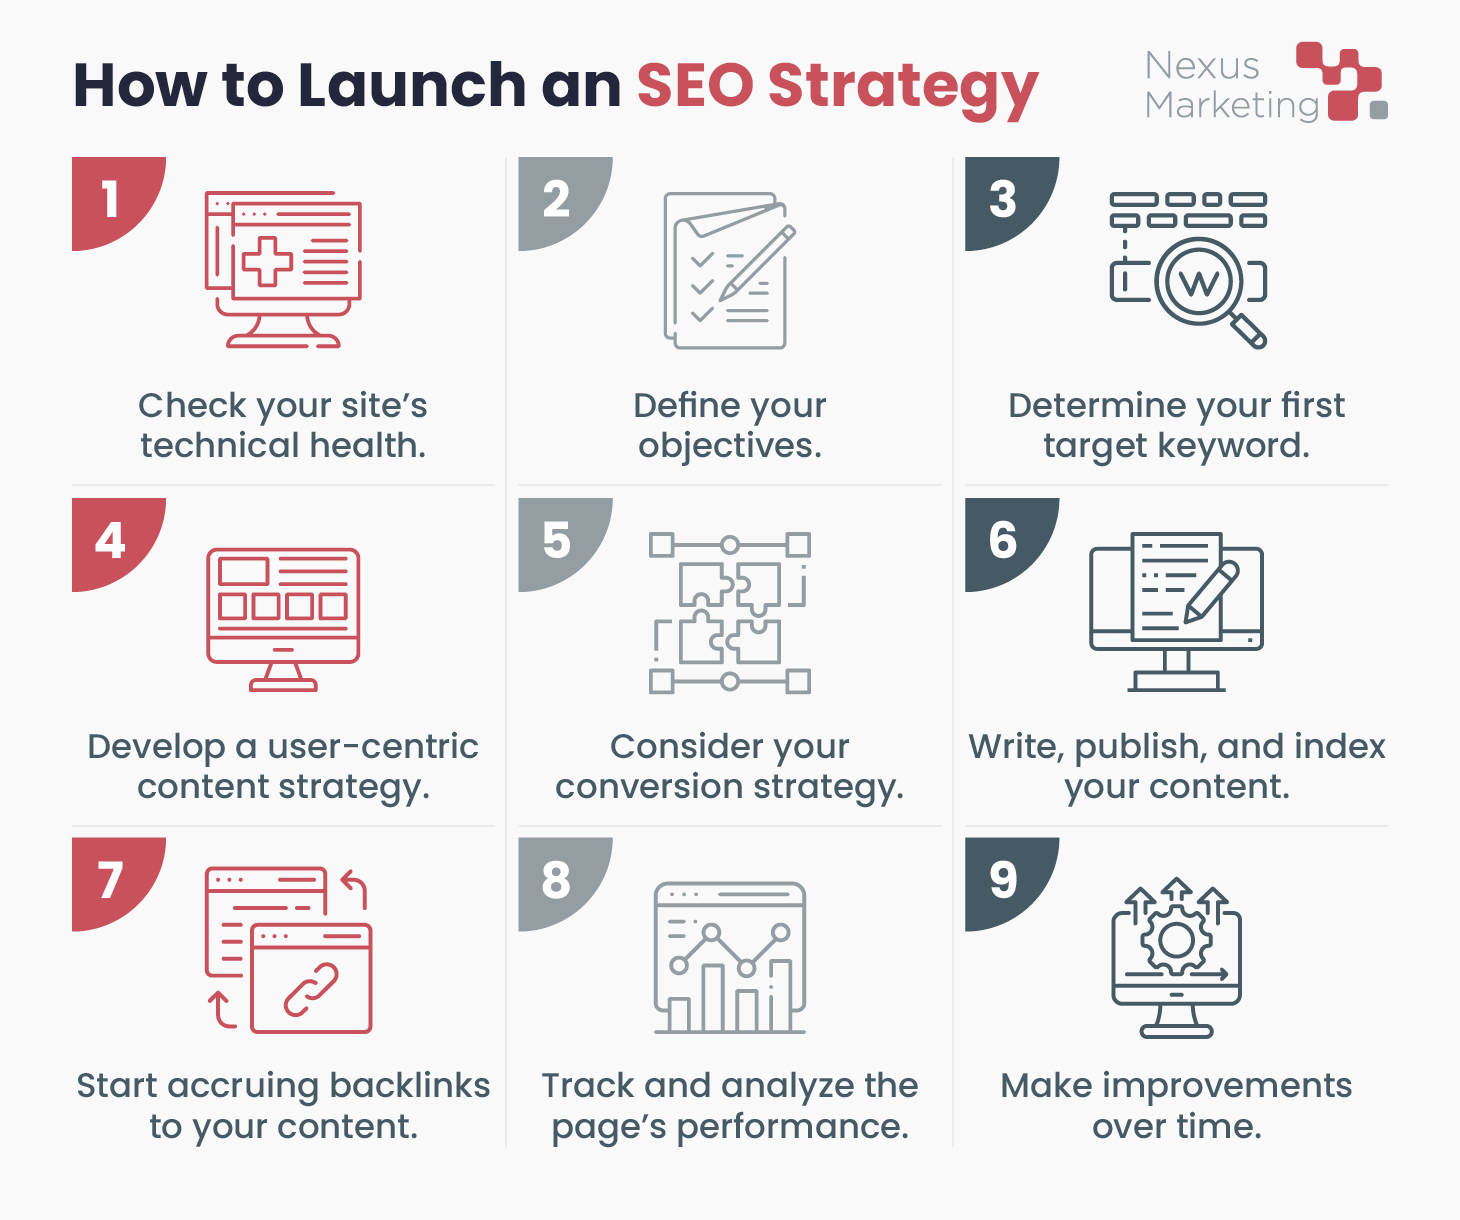 The key steps of launching an SEO strategy for the first time, detailed below